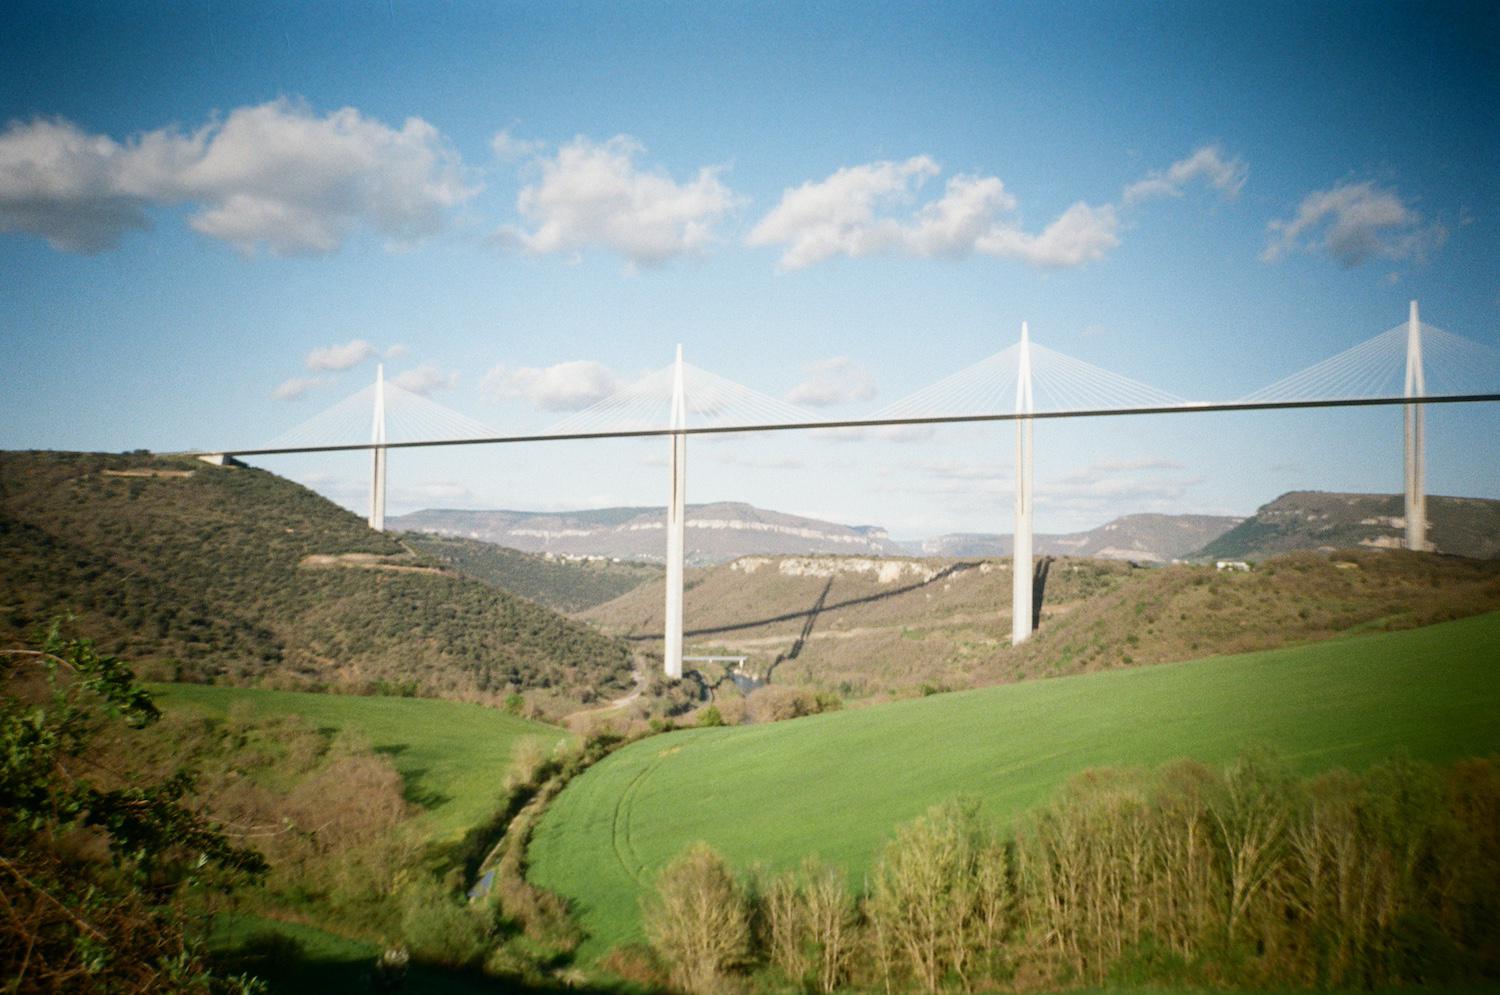 norman foster's millau viaduct, a big white bridge casting a shadow down onto the ground below it